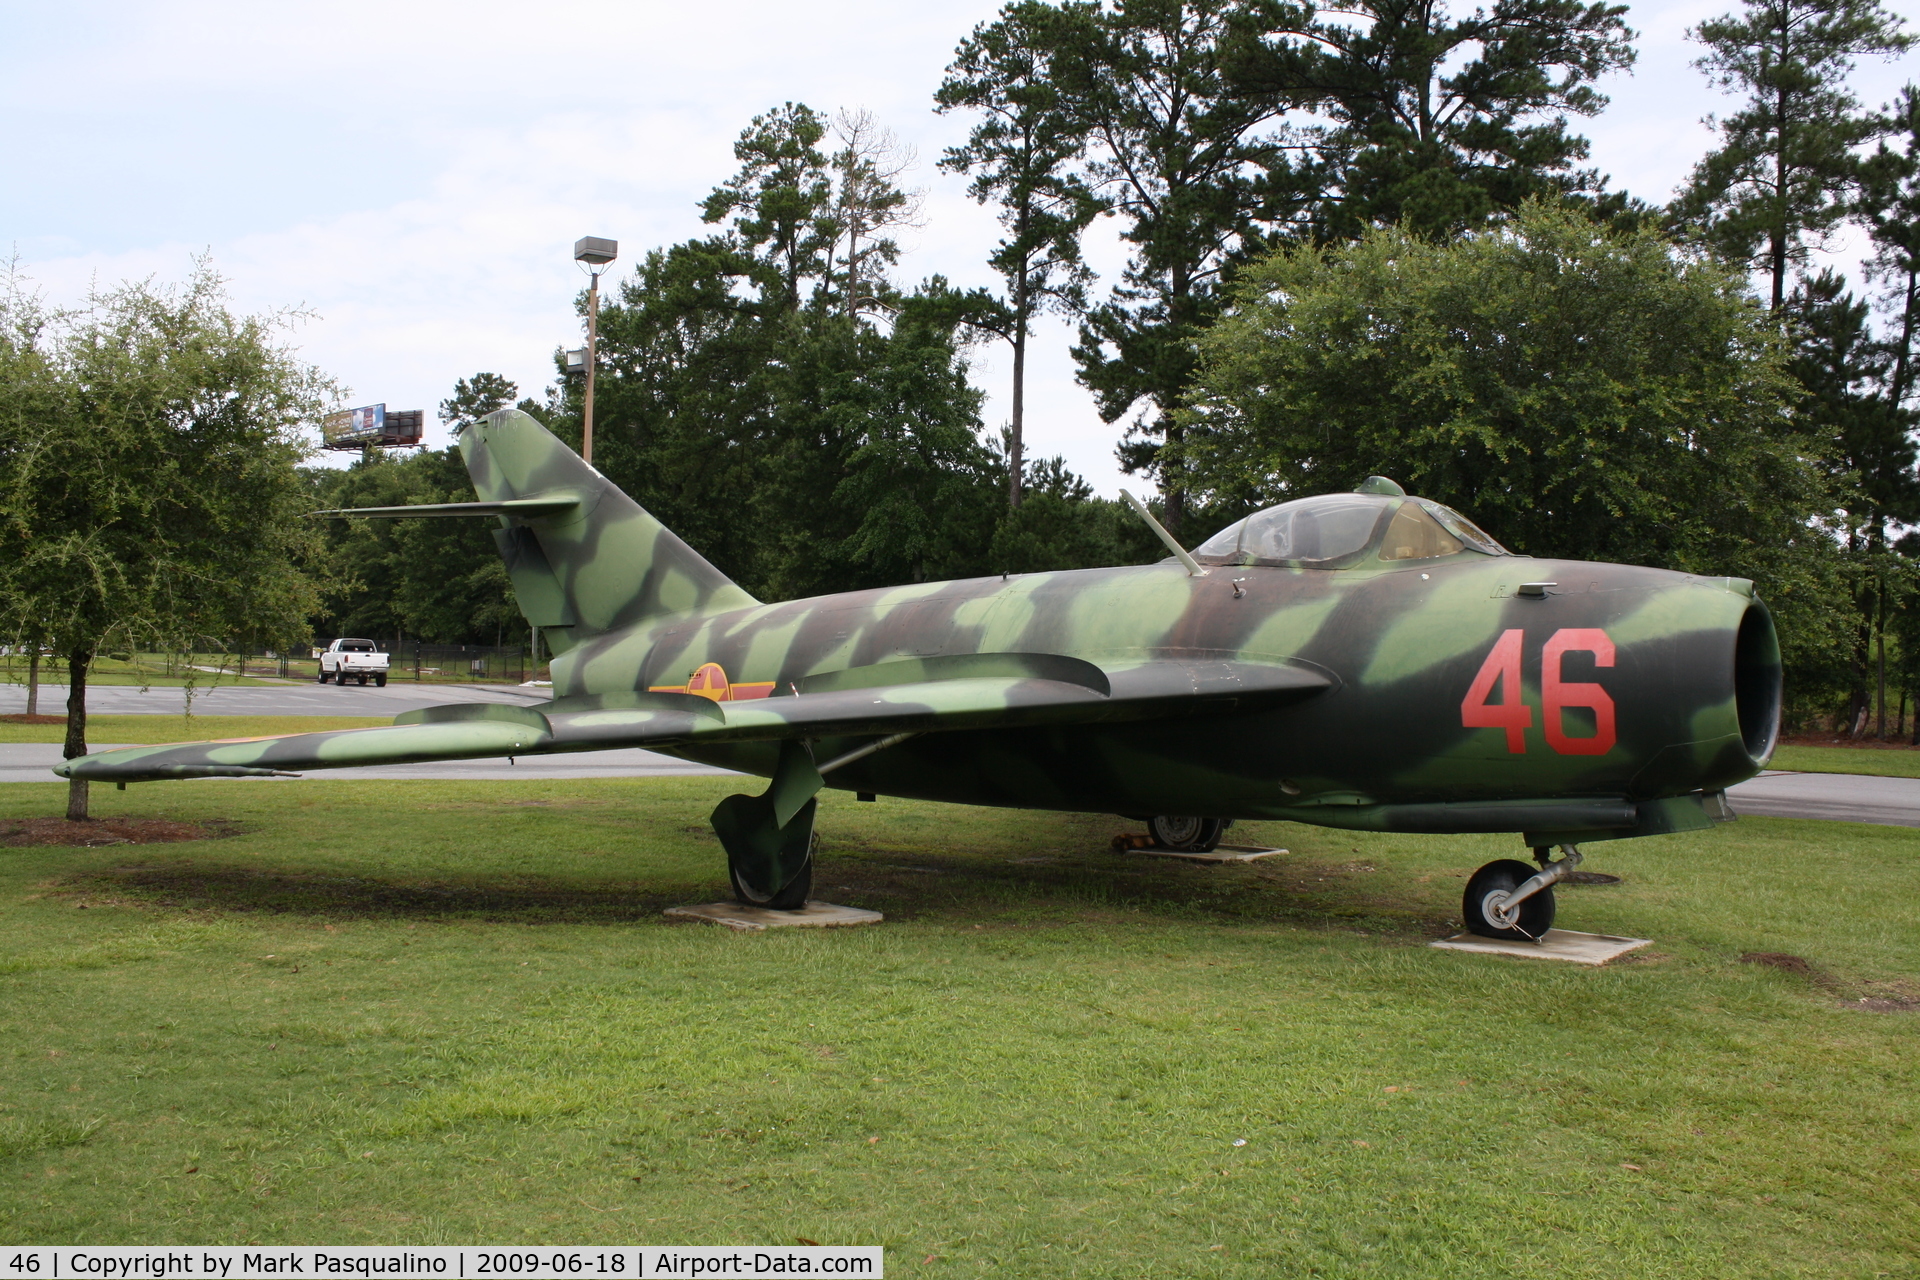 46, Mikoyan-Gurevich MiG-17A C/N 1589, MiG-17A cn 1589 on display at Mighty Eighth Air Force Museum